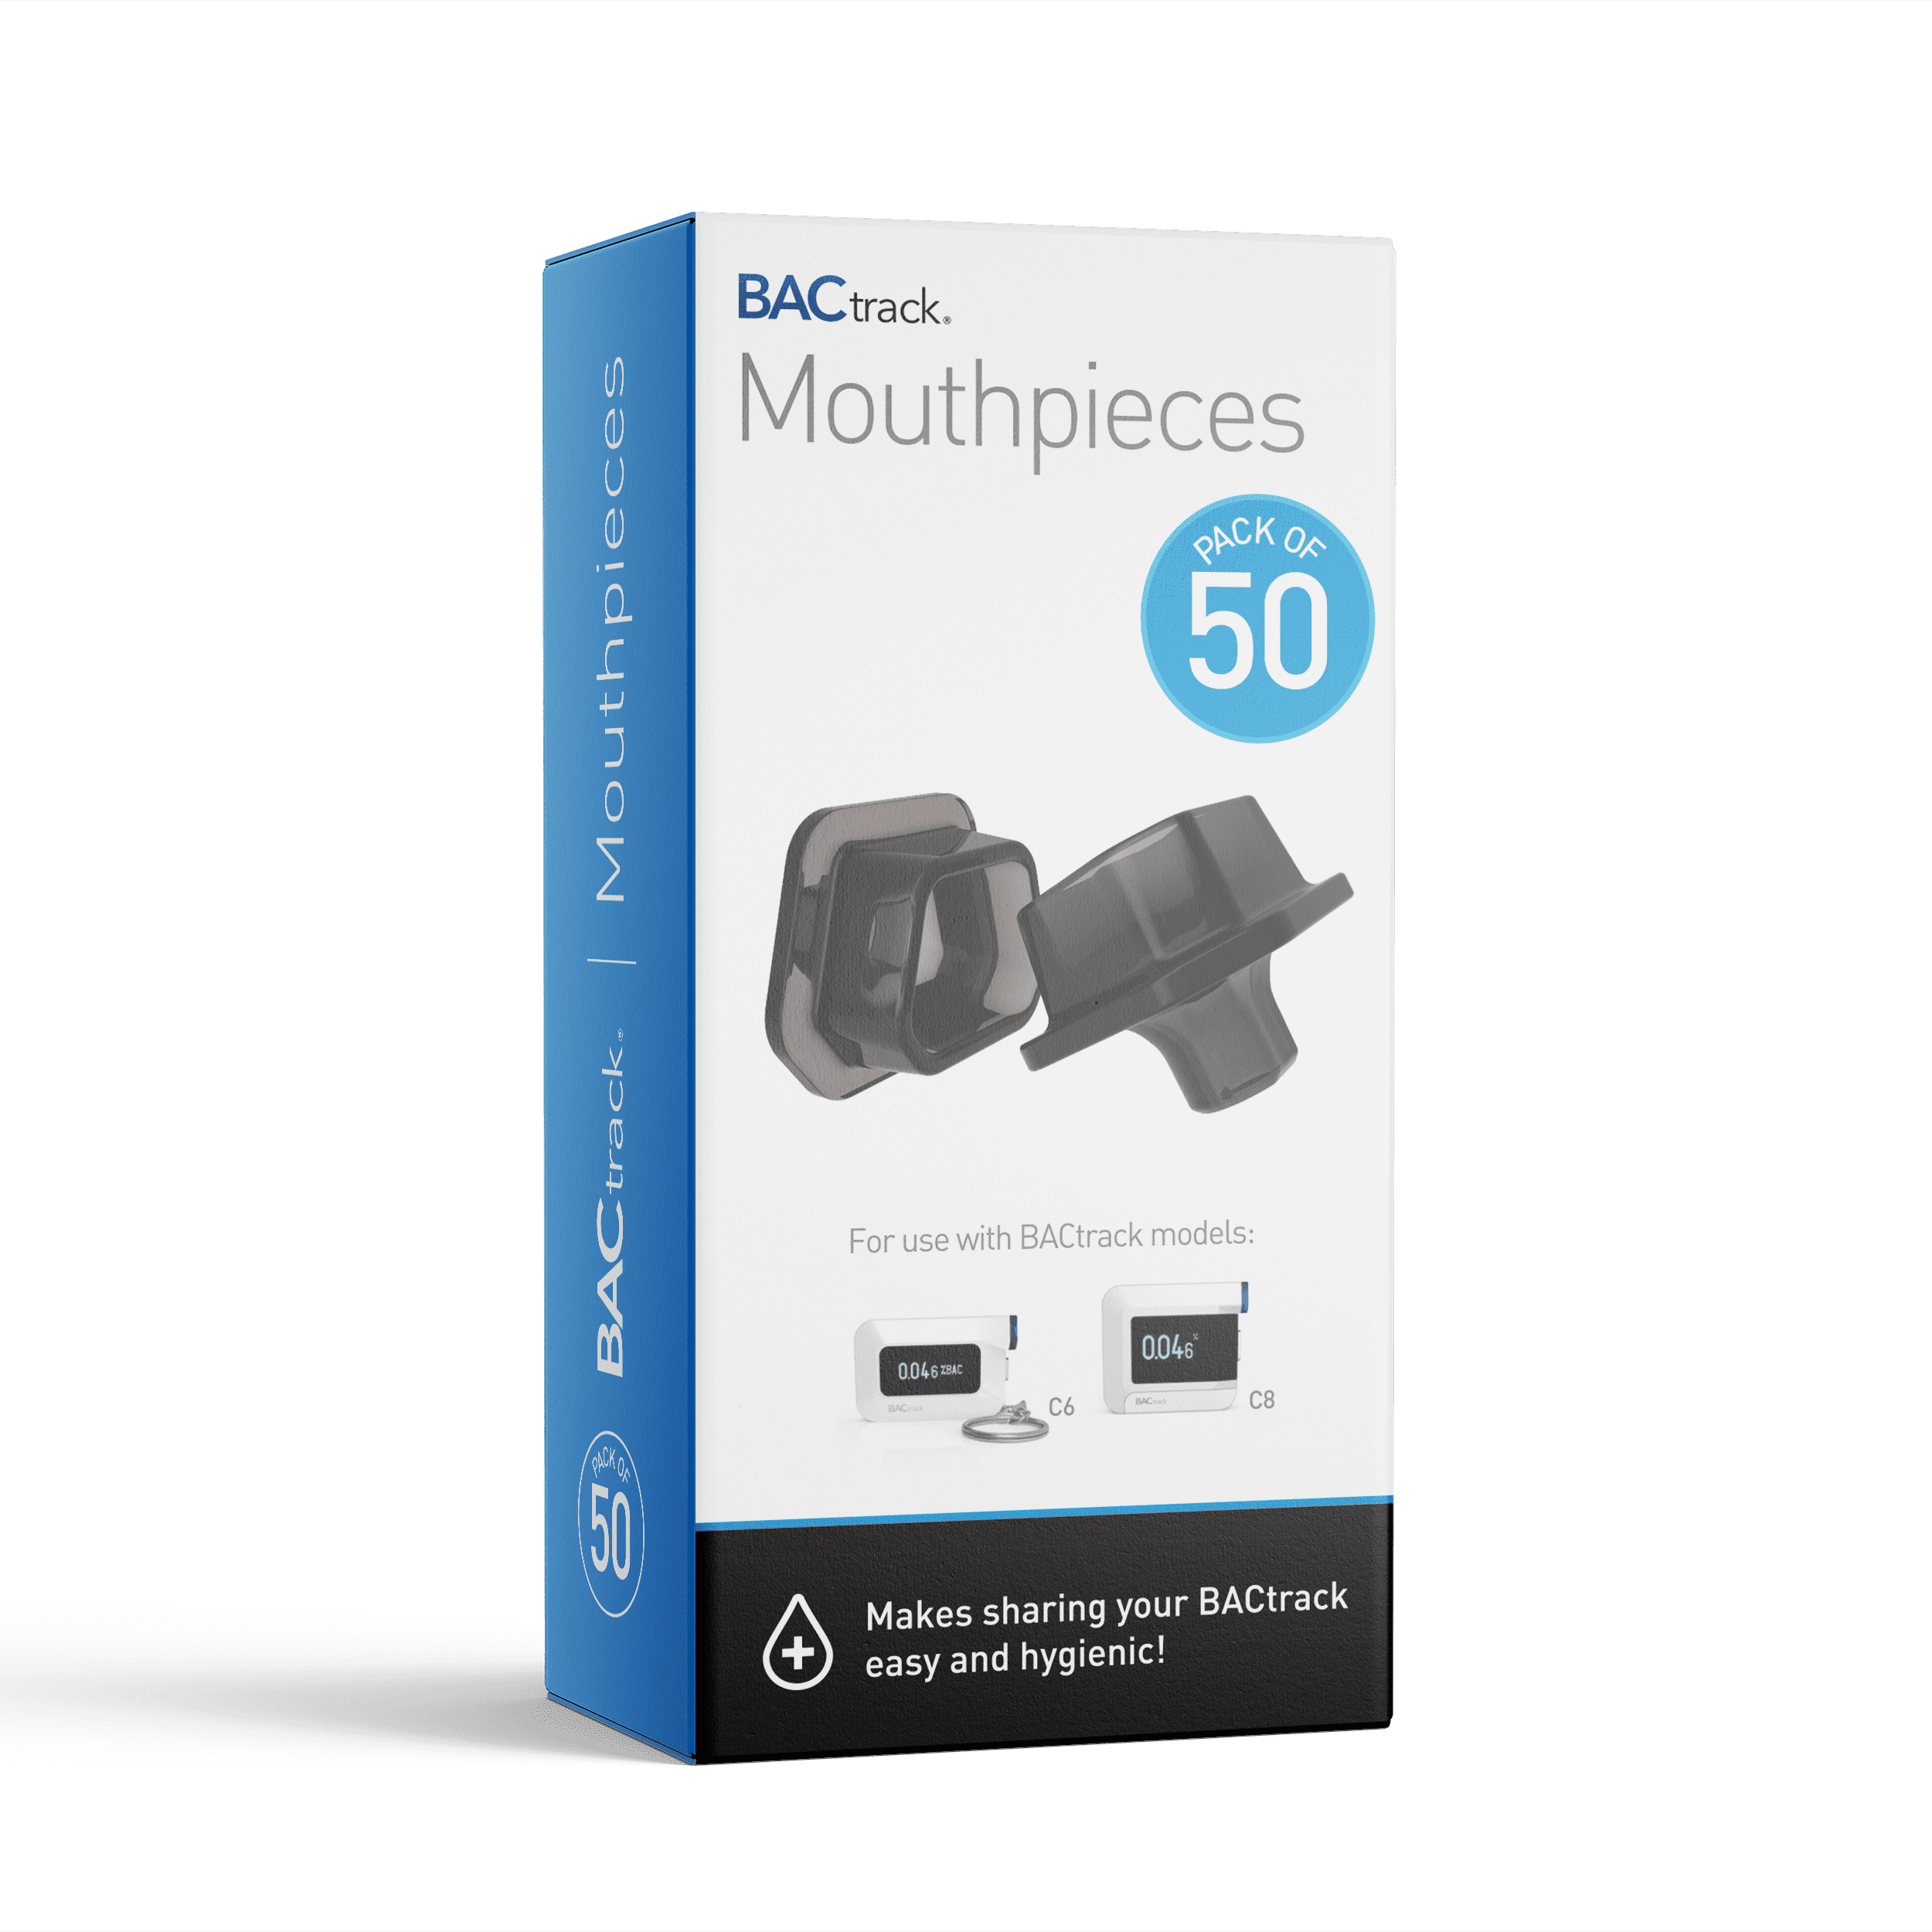 BACtrack C-Series Breathalyzer Mouthpieces